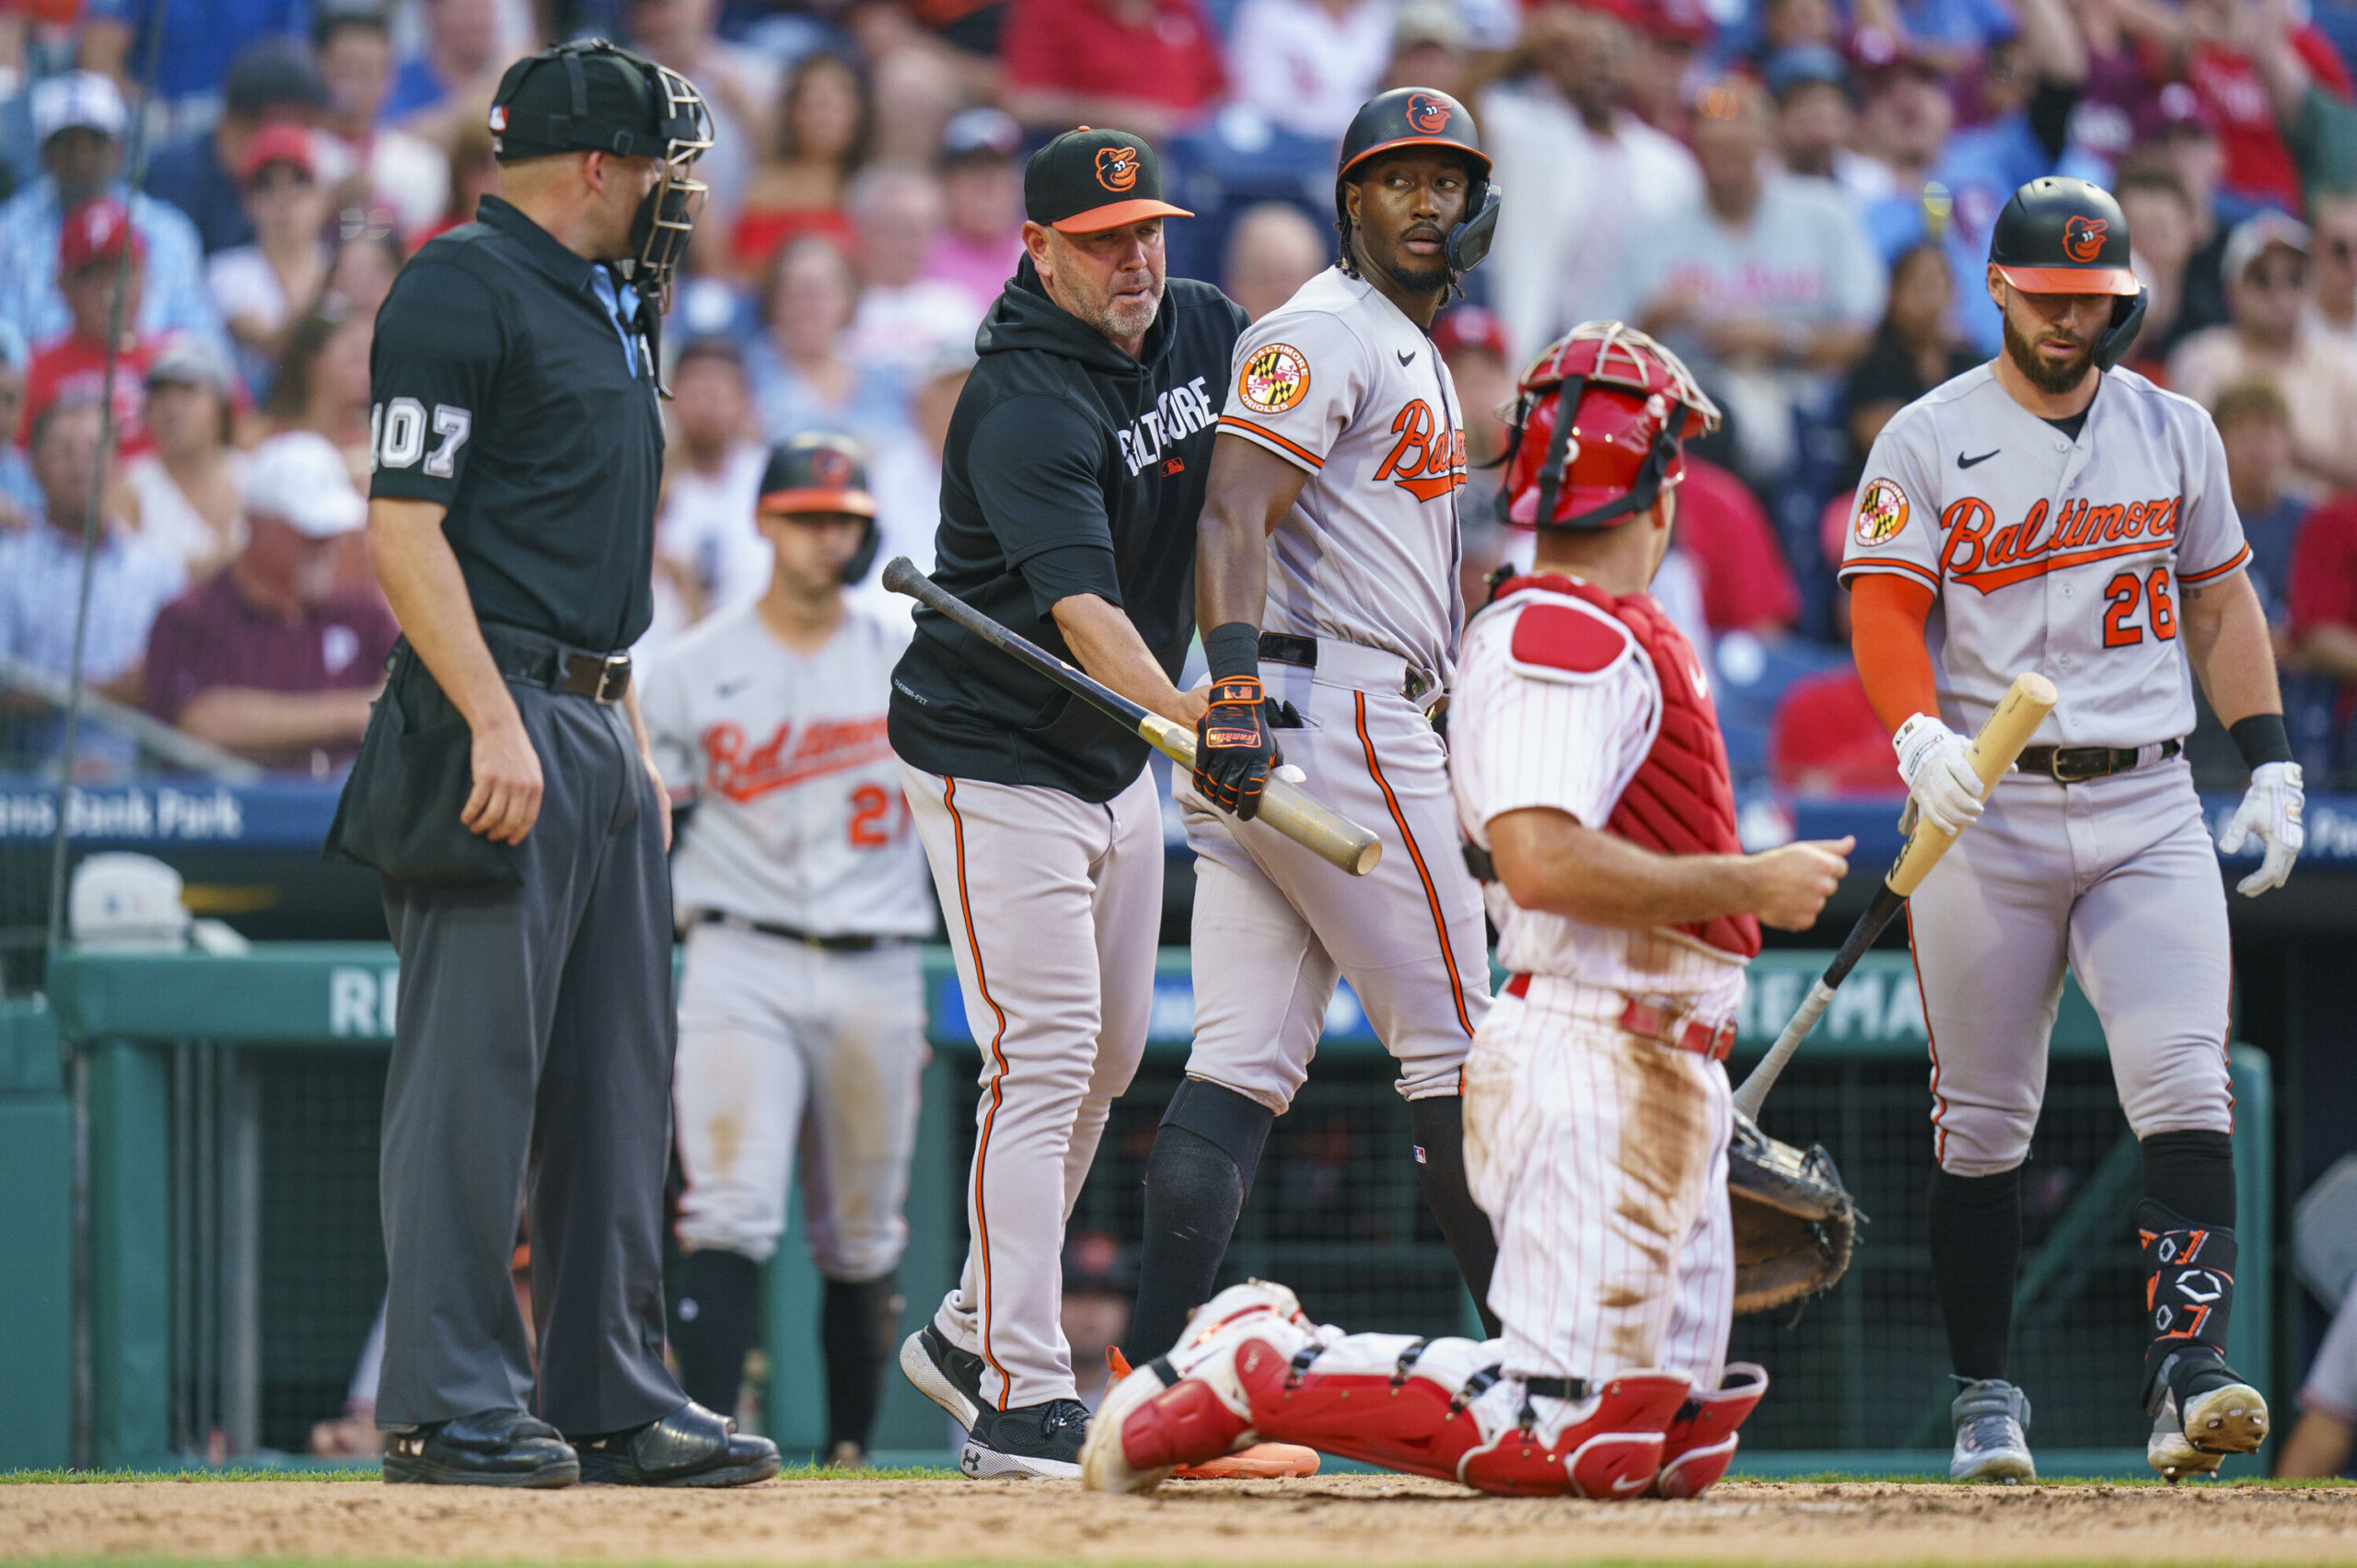 Phillies injury updates: How bad are injuries to J.T. Realmuto